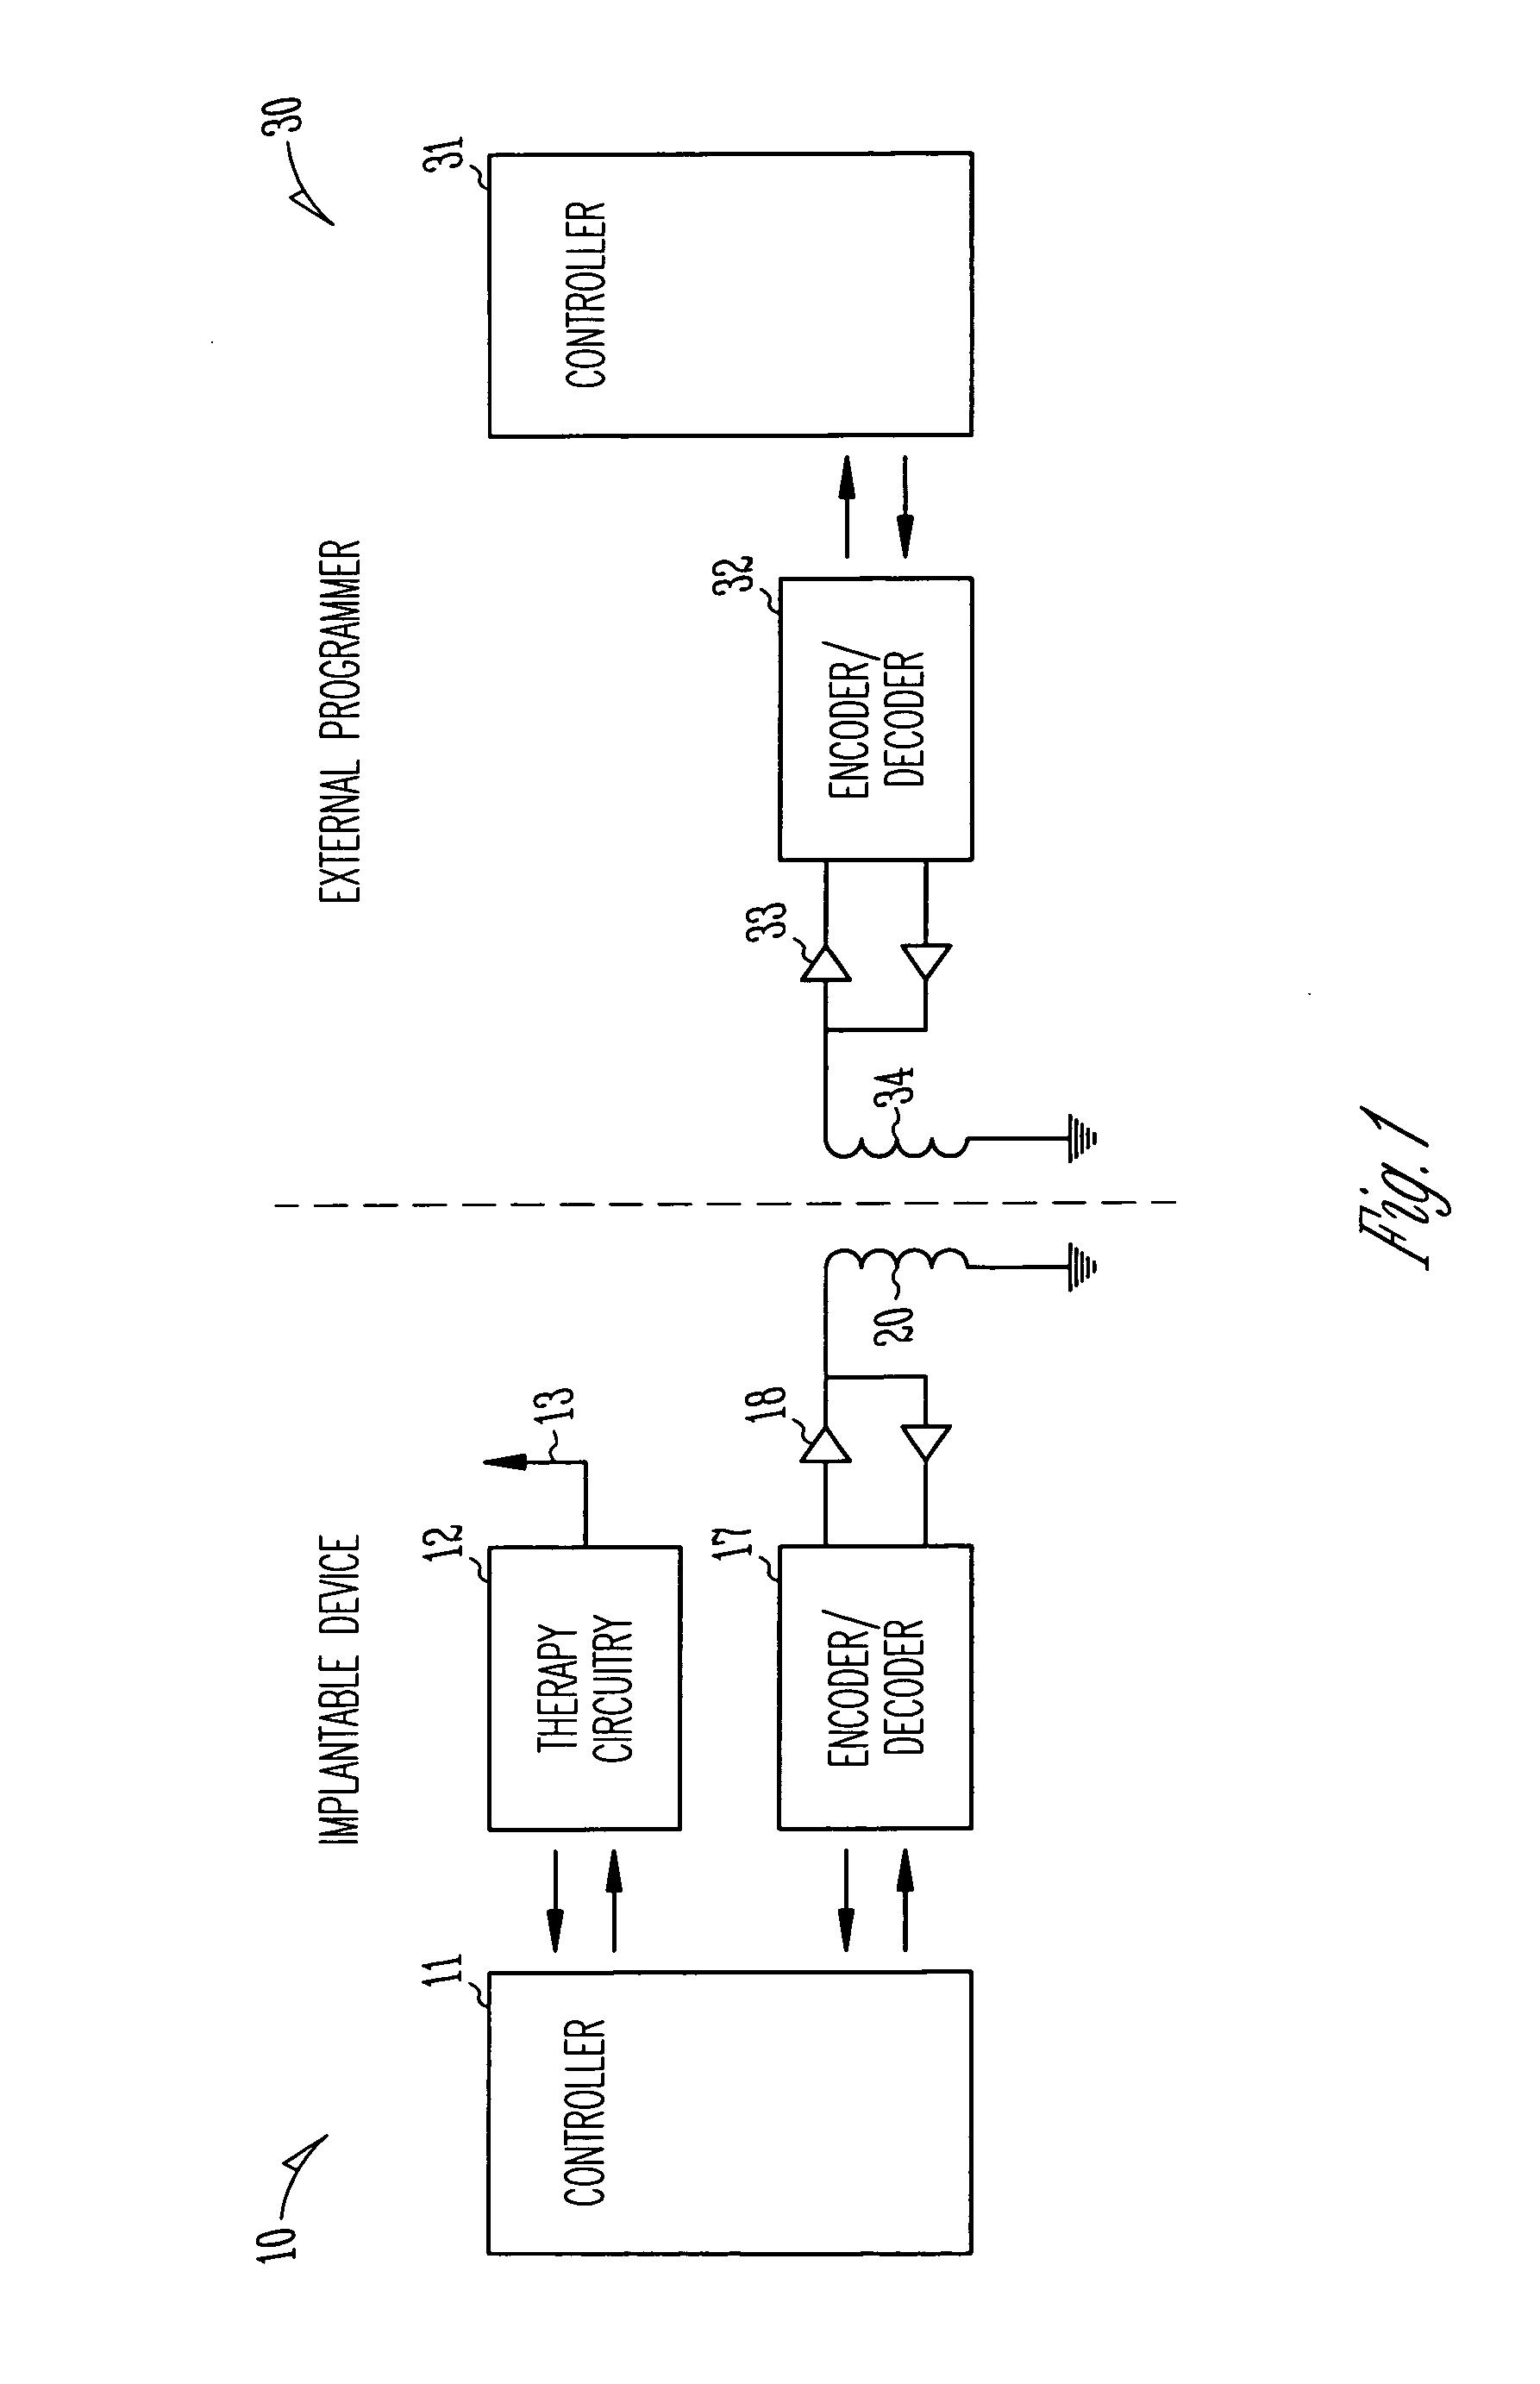 Ferrite core telemetry coil for implantable medical device